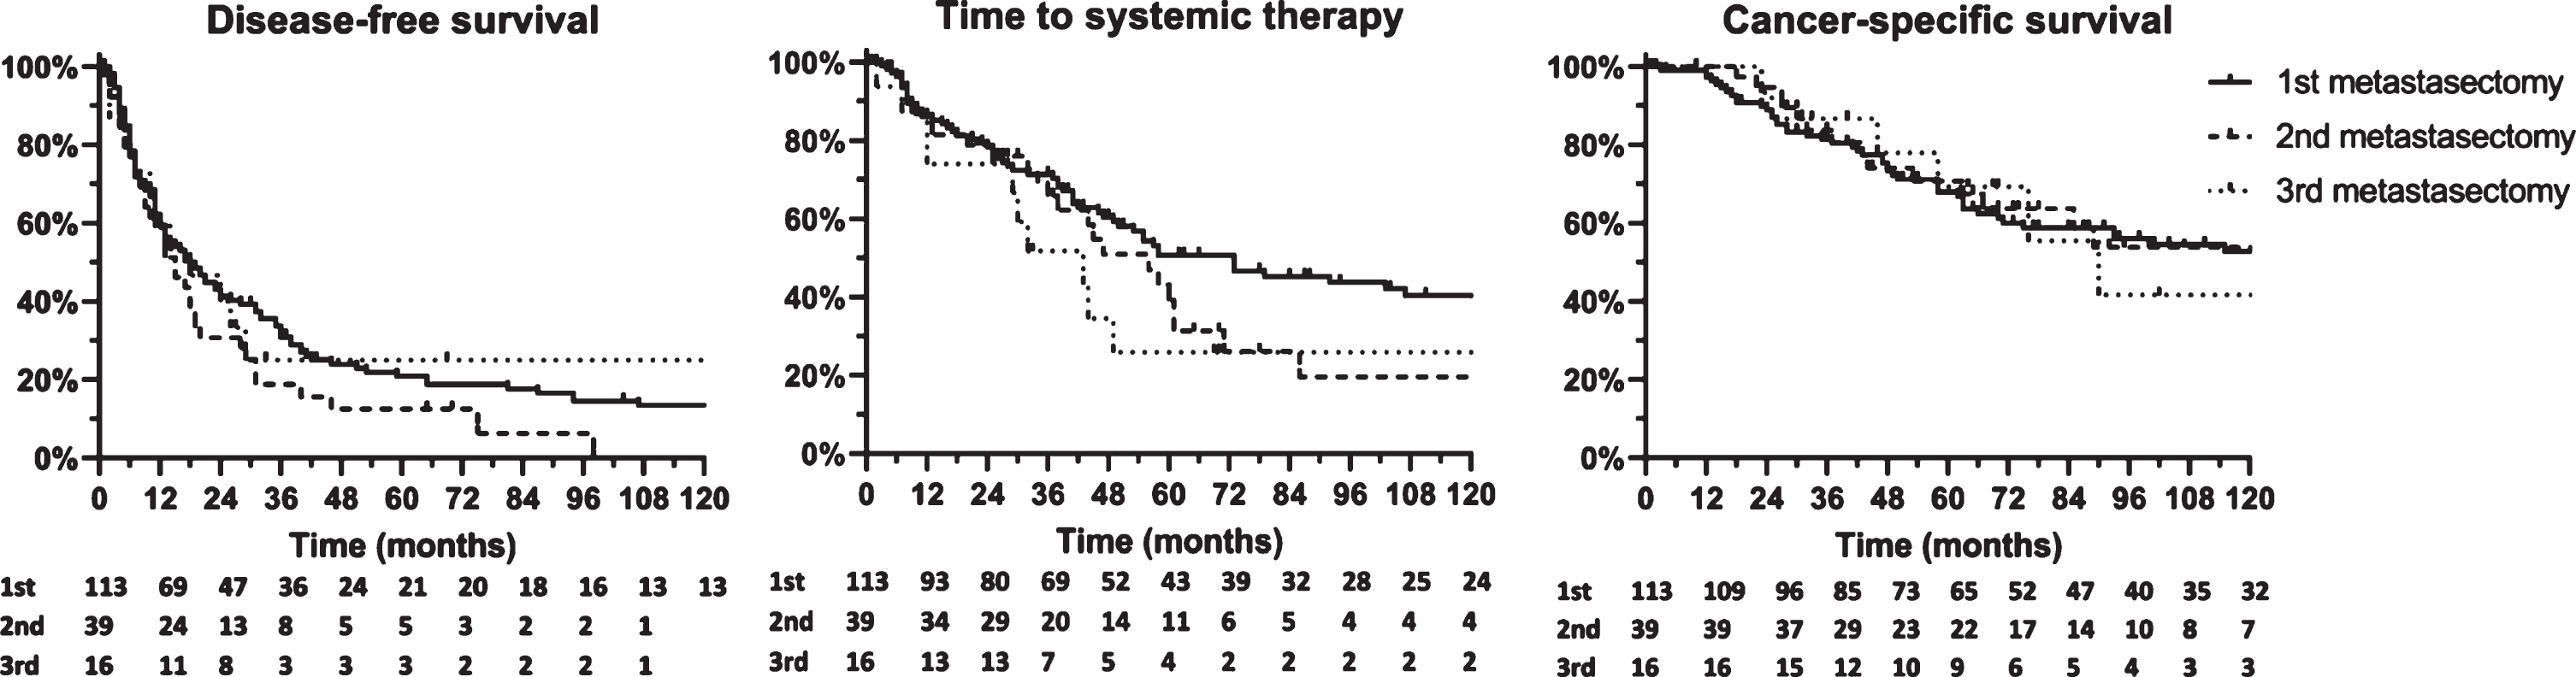 Outcomes after first, second and third metastasectomy.